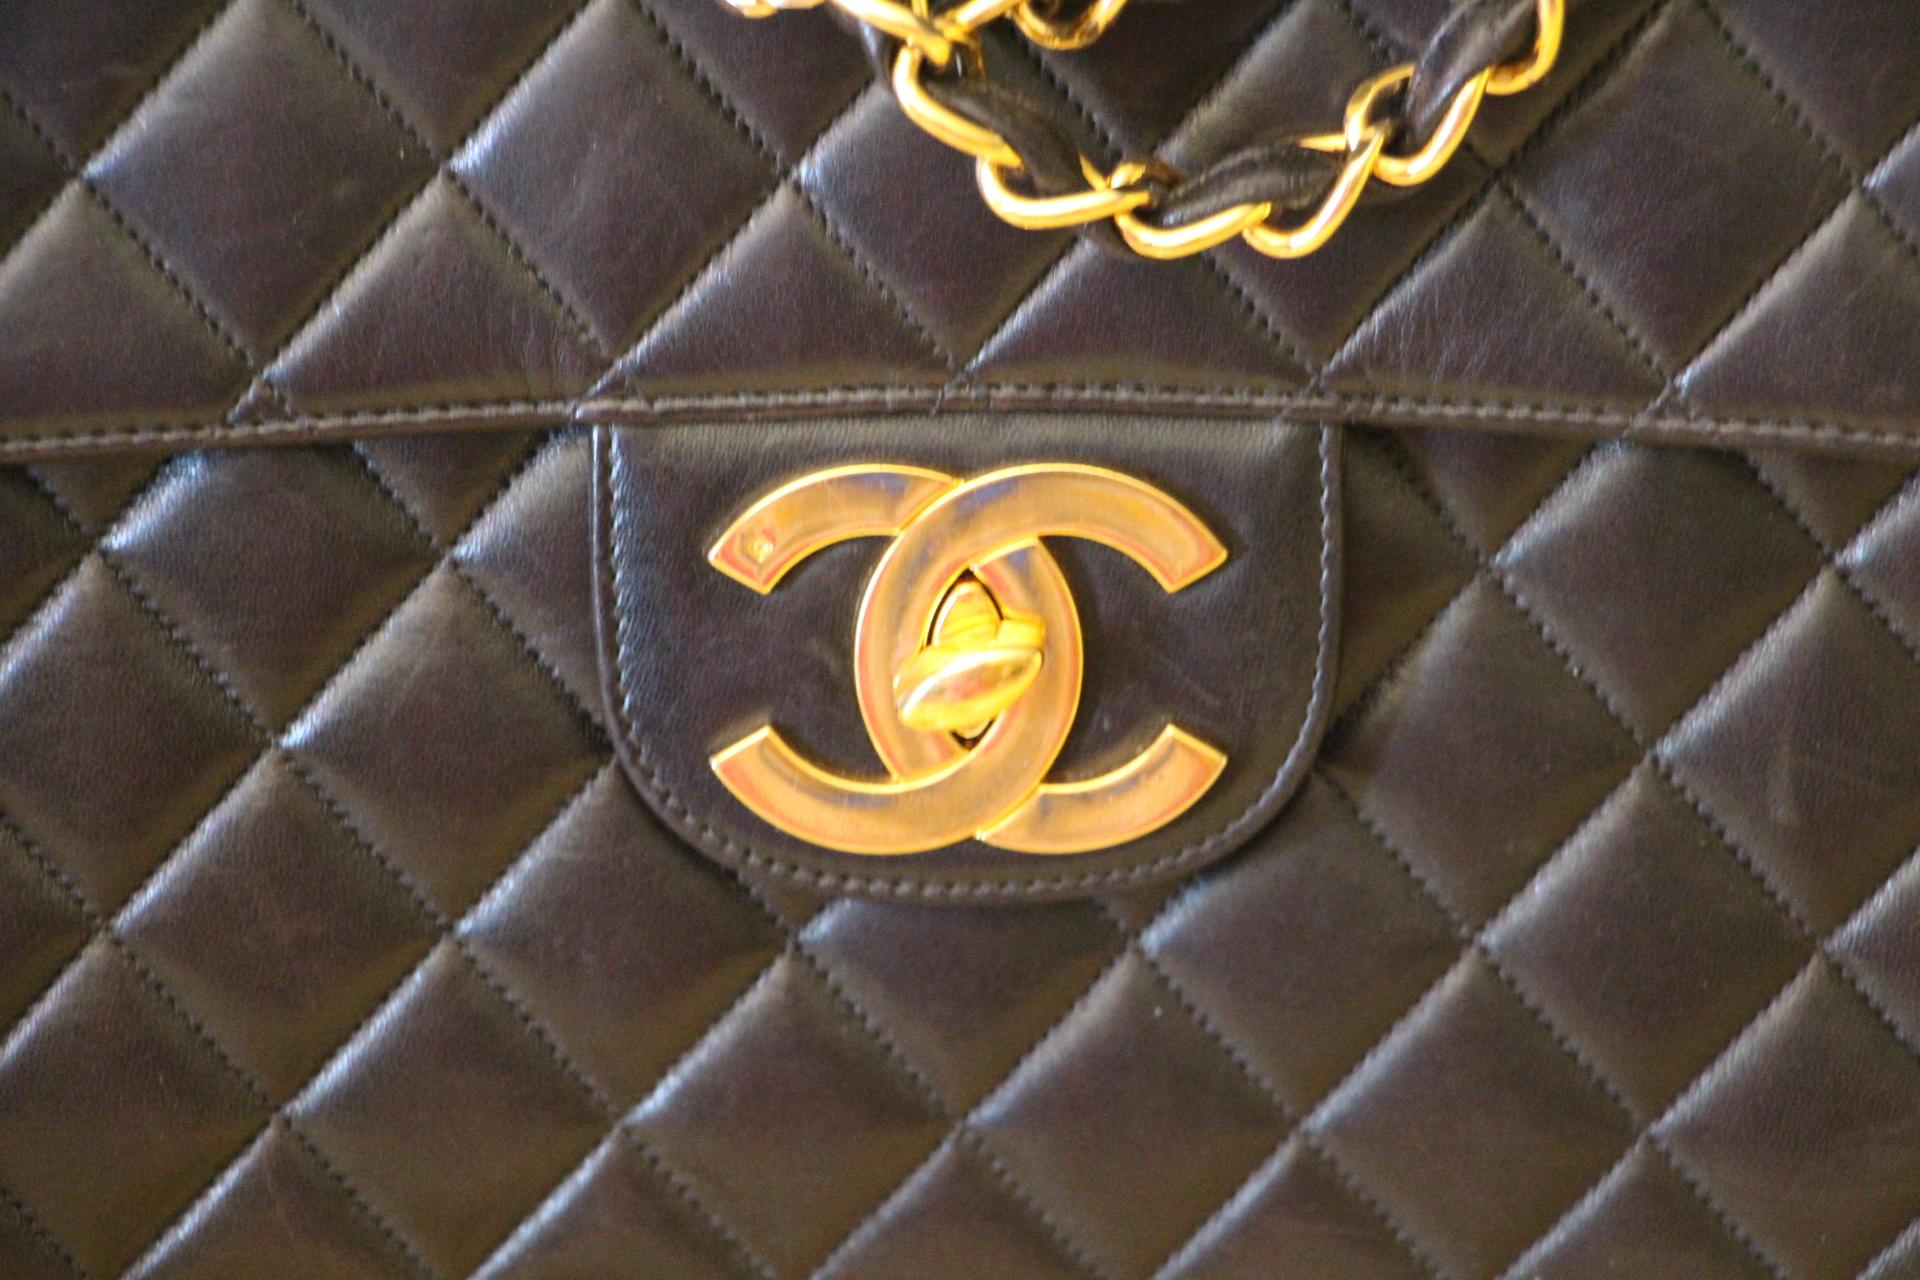 An iconic Chanel jumbo flap bag made of a soft black lambskin leather with bright gold tone hardware.
the classic Chanel chain with gold tone chain links interwovzen with black lambskin leather can be worn single or double.